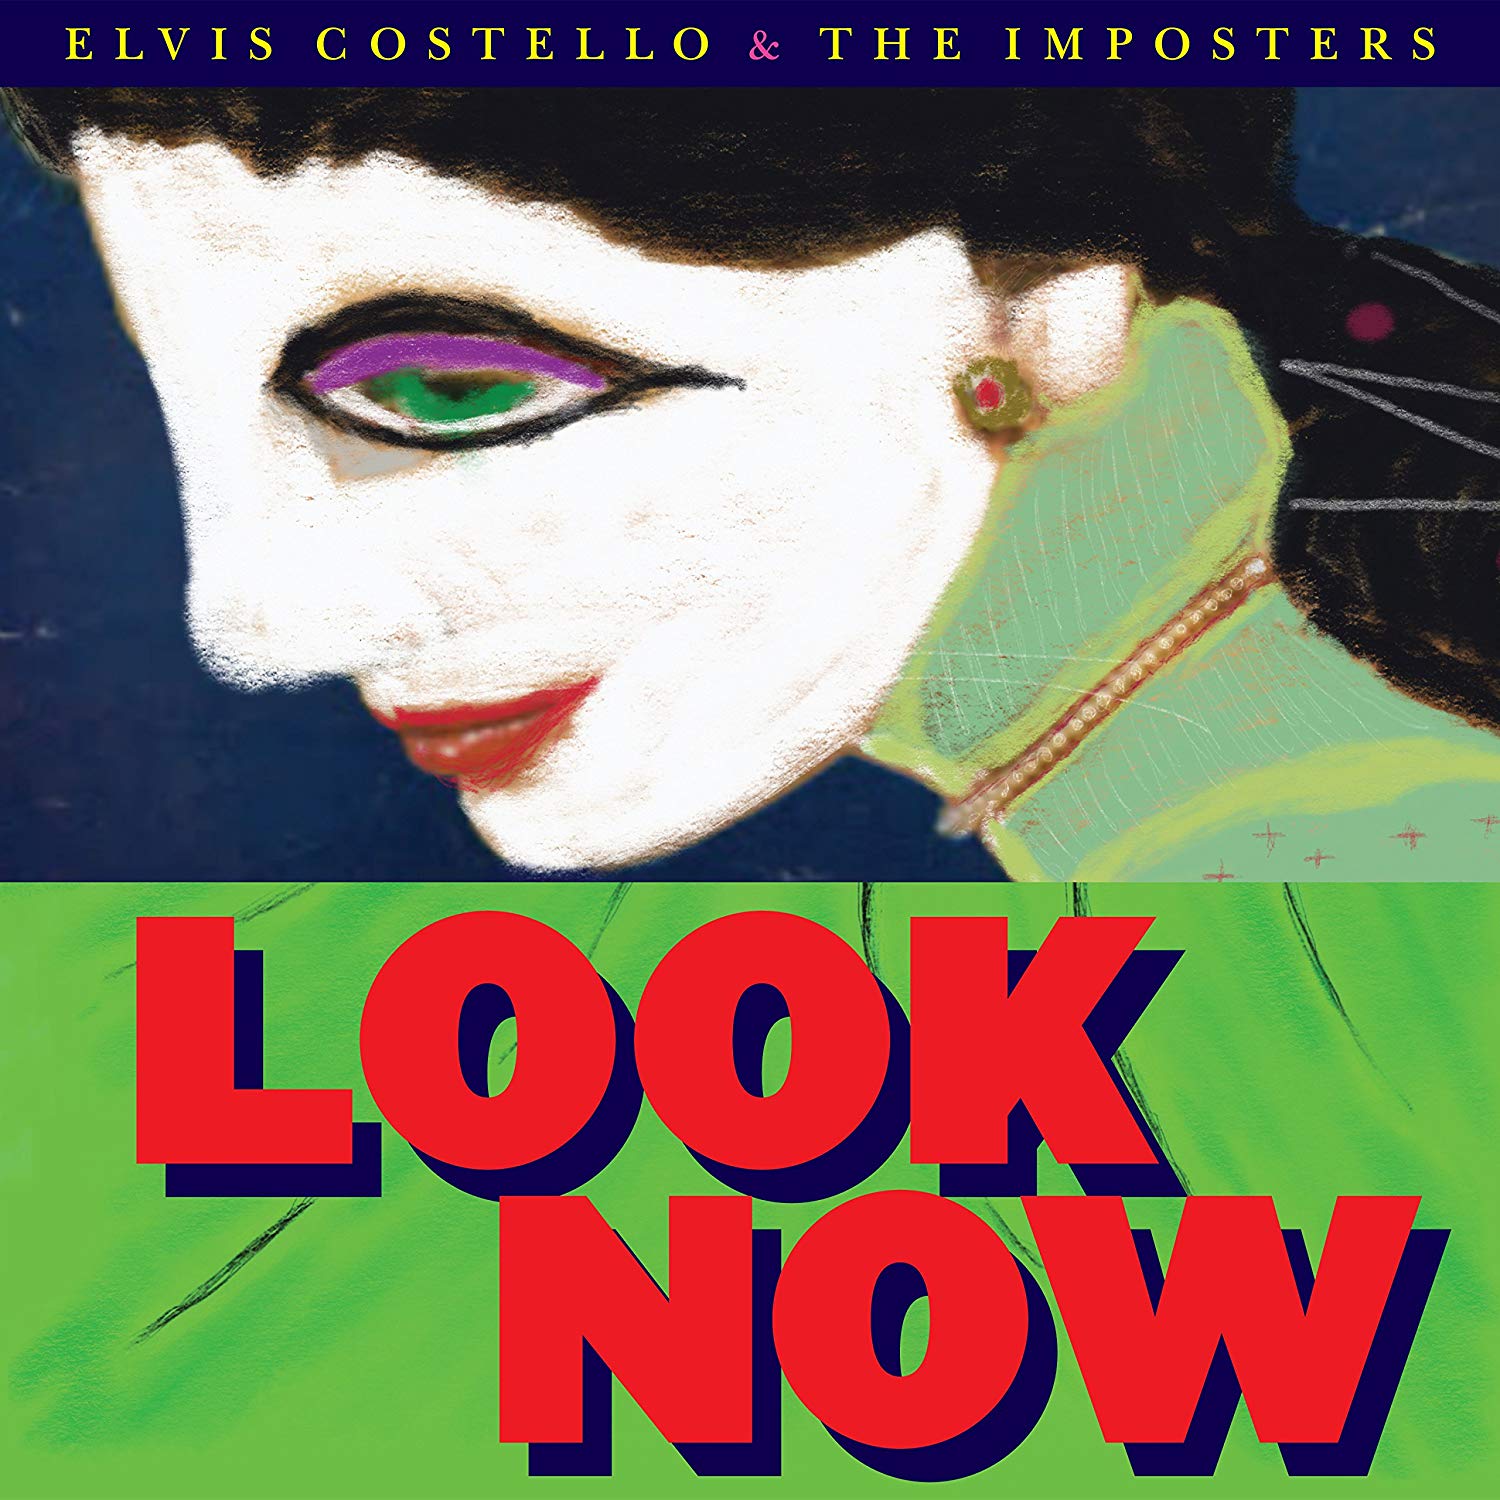 ELVIS COSTELLO & THE IMPOSTERS / エルヴィス・コステロ&ジ・インポスターズ / LOOK NOW (DELUXE VERSION 180G 2LP)